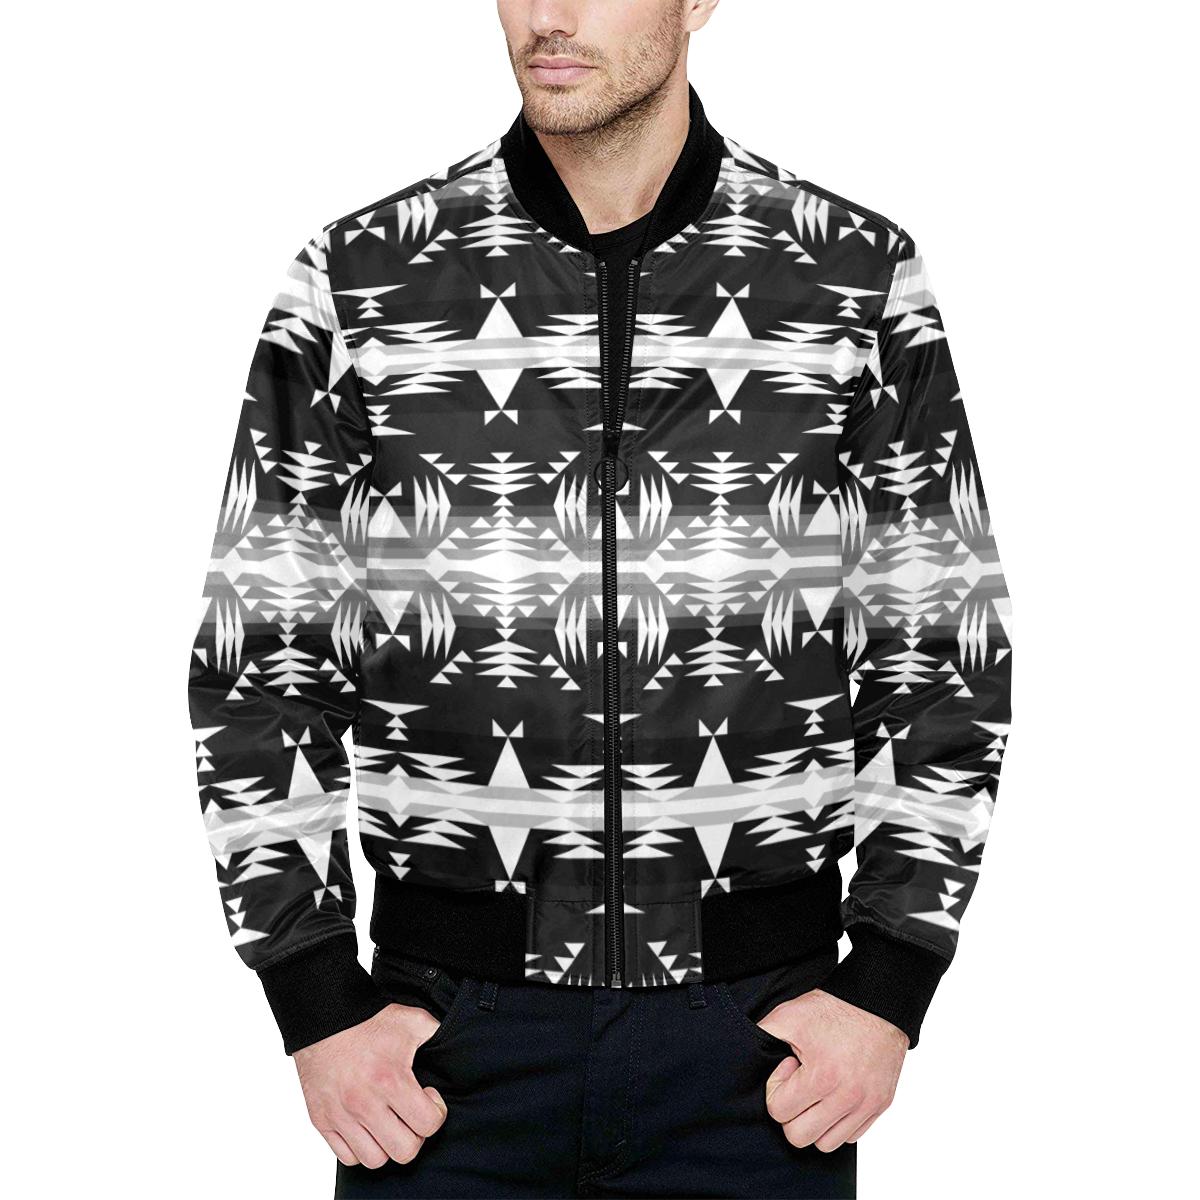 Between the Mountains Black and White Unisex Heavy Bomber Jacket with Quilted Lining All Over Print Quilted Jacket for Men (H33) e-joyer 